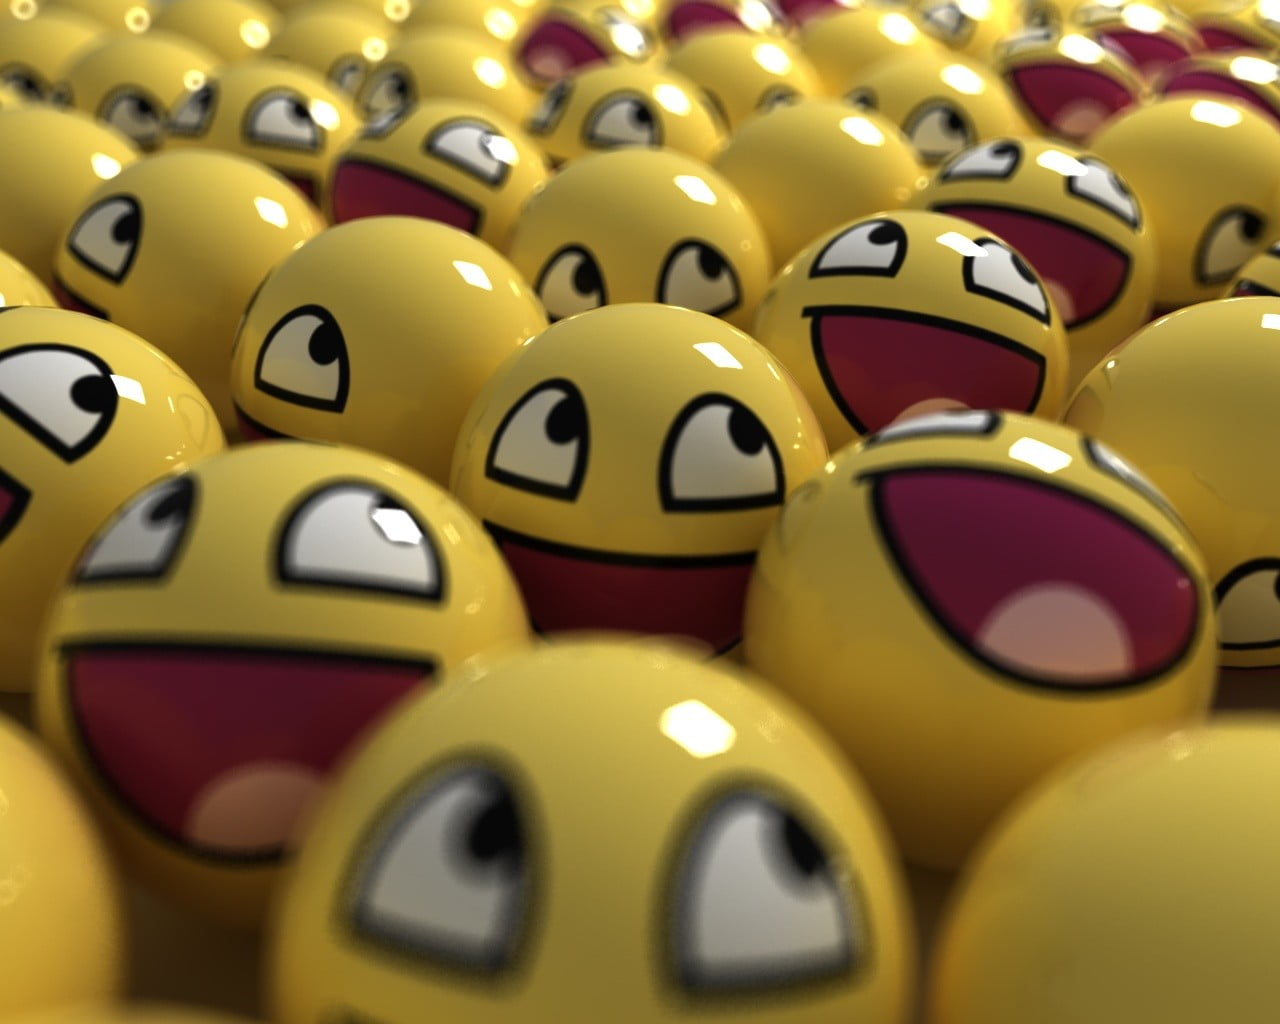 laughing emoji toy lot, humor, memes, face, smiling, awesome face